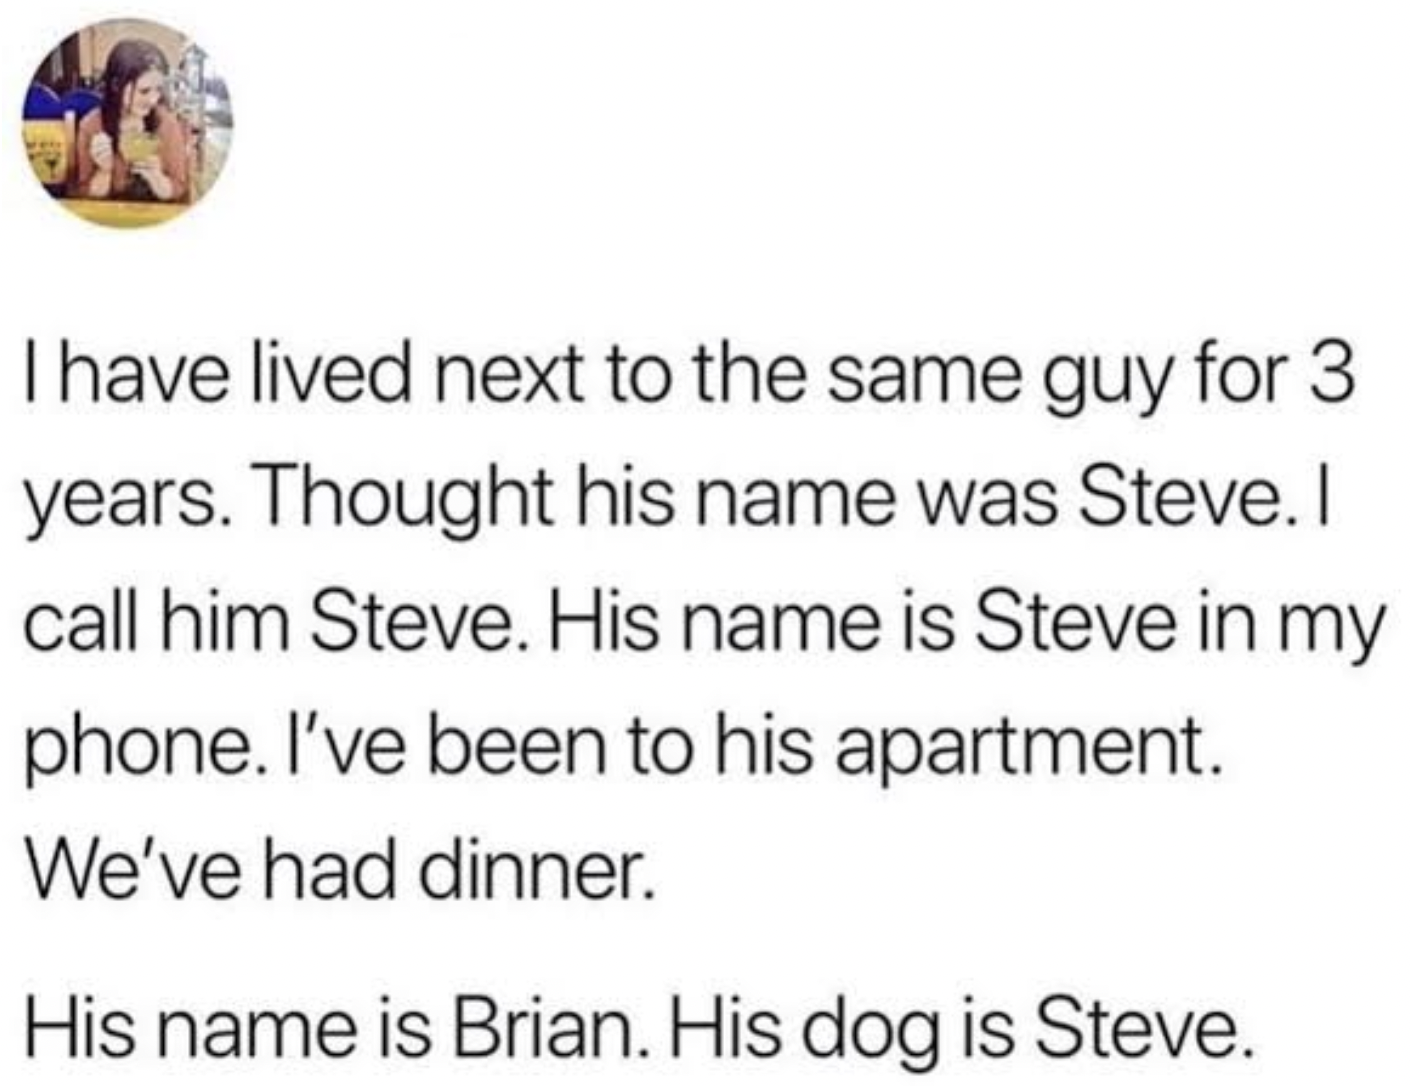 Facepalms and Cringe Pics - Cringe comedy - I have lived next to the same guy for 3 years. Thought his name was Steve. I call him Steve. His name is Steve in my phone. I've been to his apartment. We've had dinner. His name is Brian. His dog is Steve.